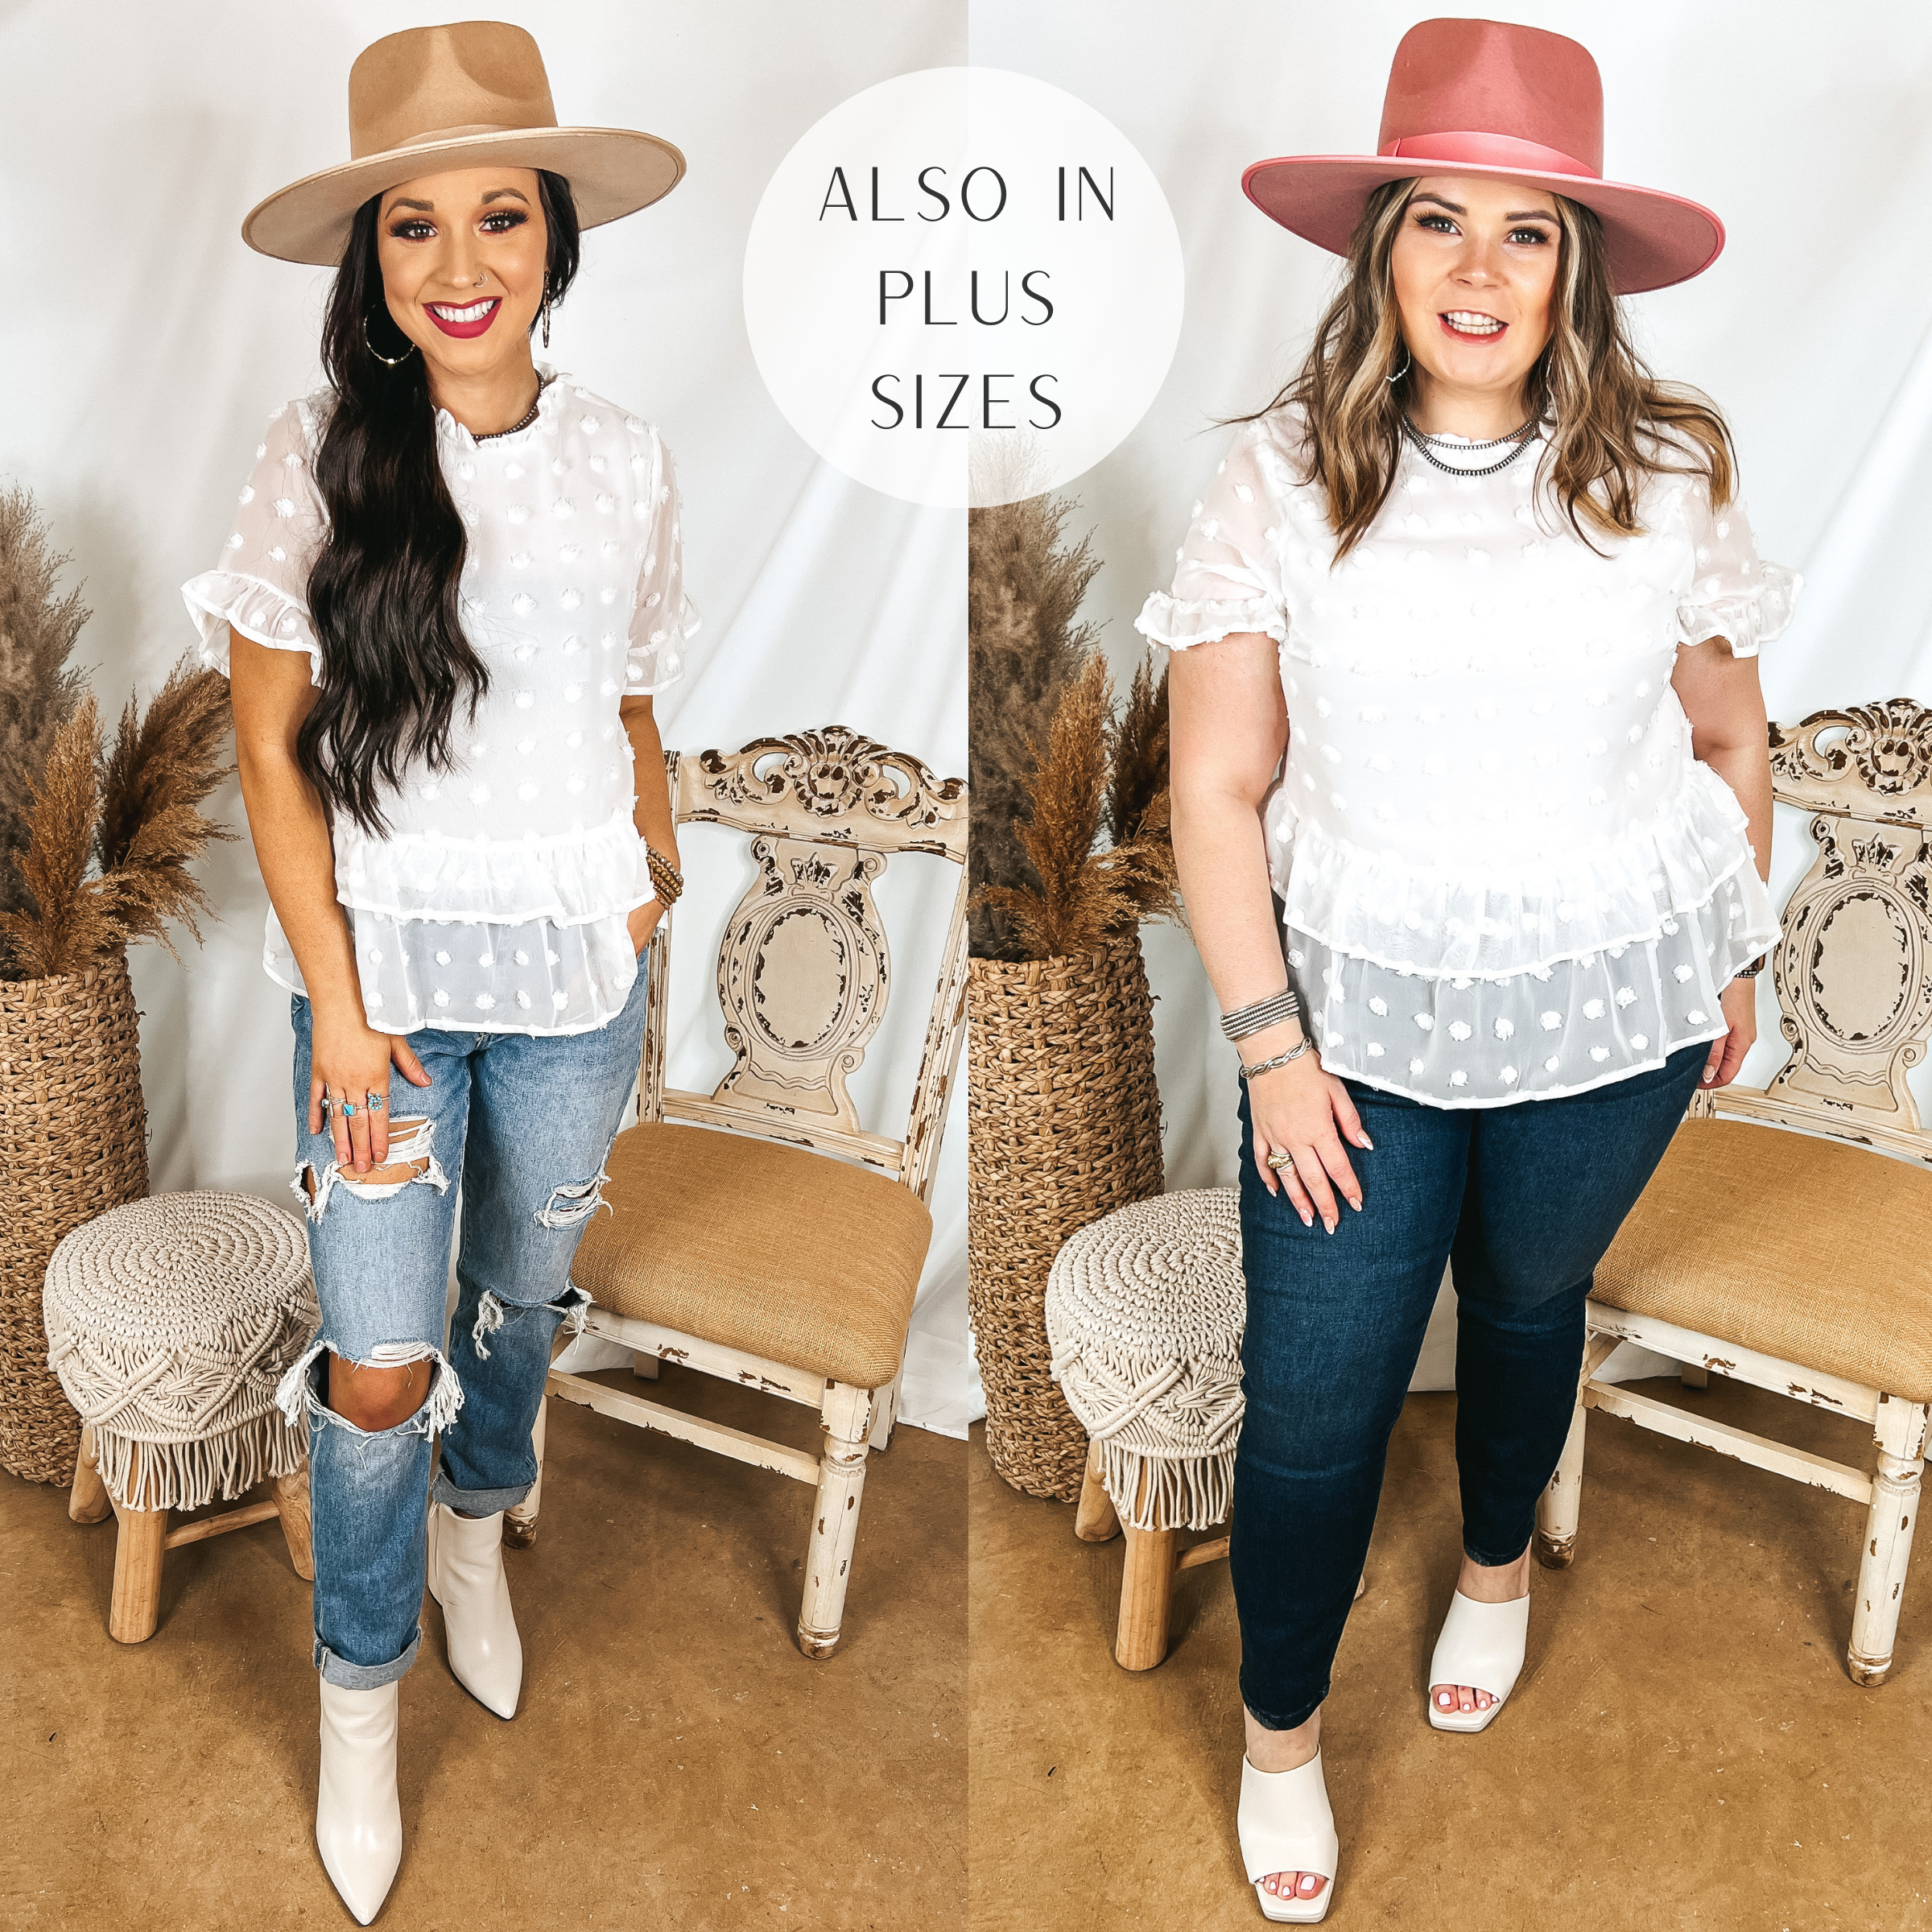 Models are wearing a white swiss dot peplum top. Size small model has it paired with distressed jeans, white booties, and a tan hat. Size large model has it paired with dark wash jeans, white heels, and a pink hat.